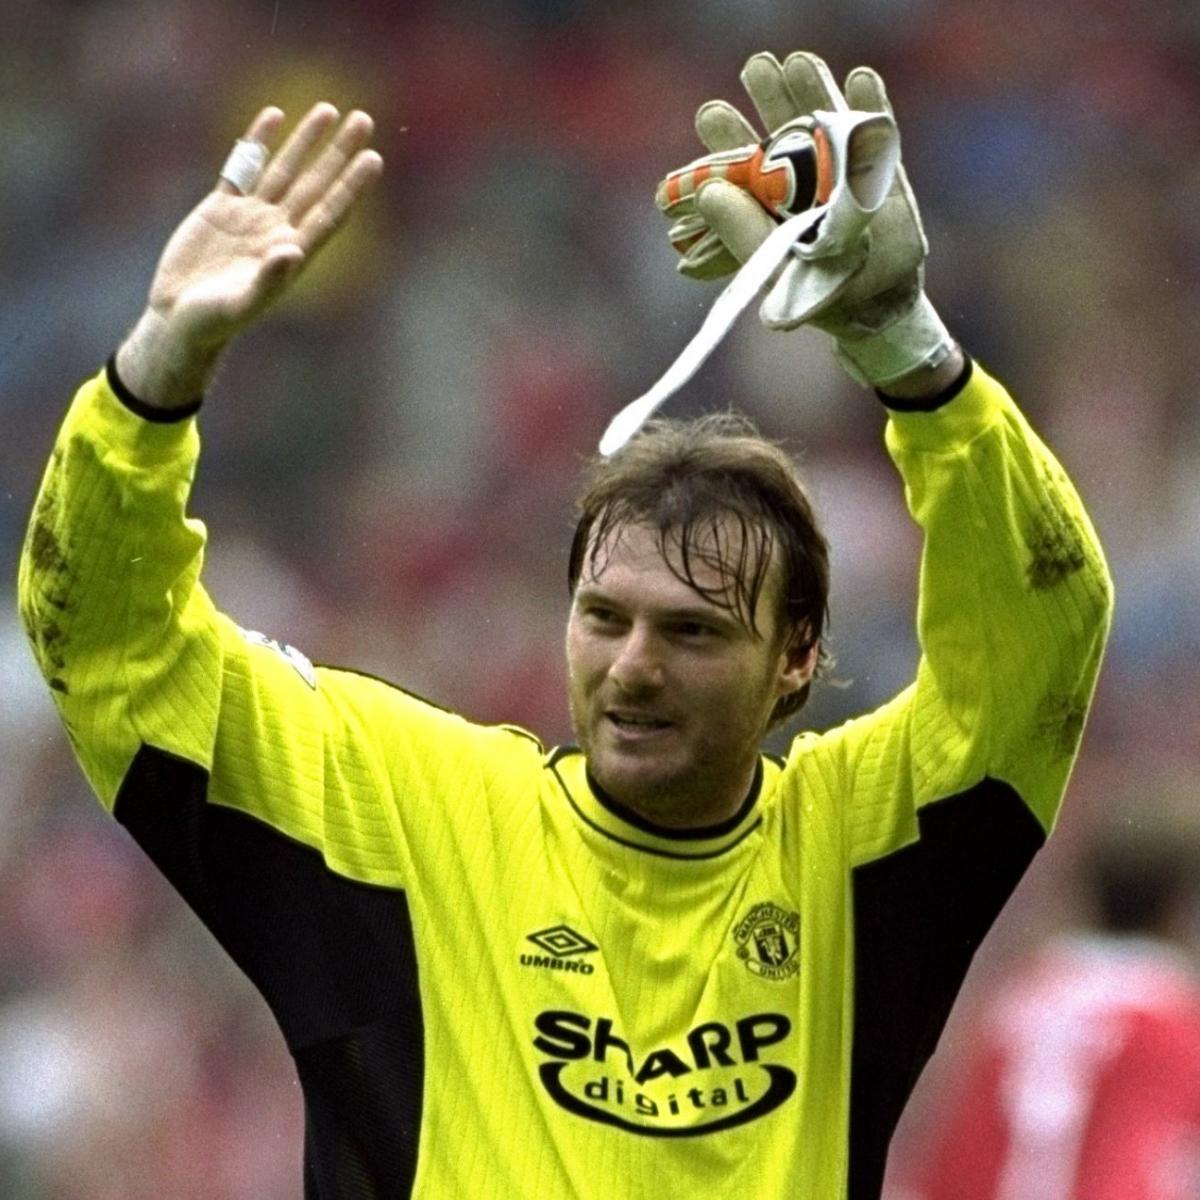 The 20 worst goalkeeper kits in history: From Schmeichel to